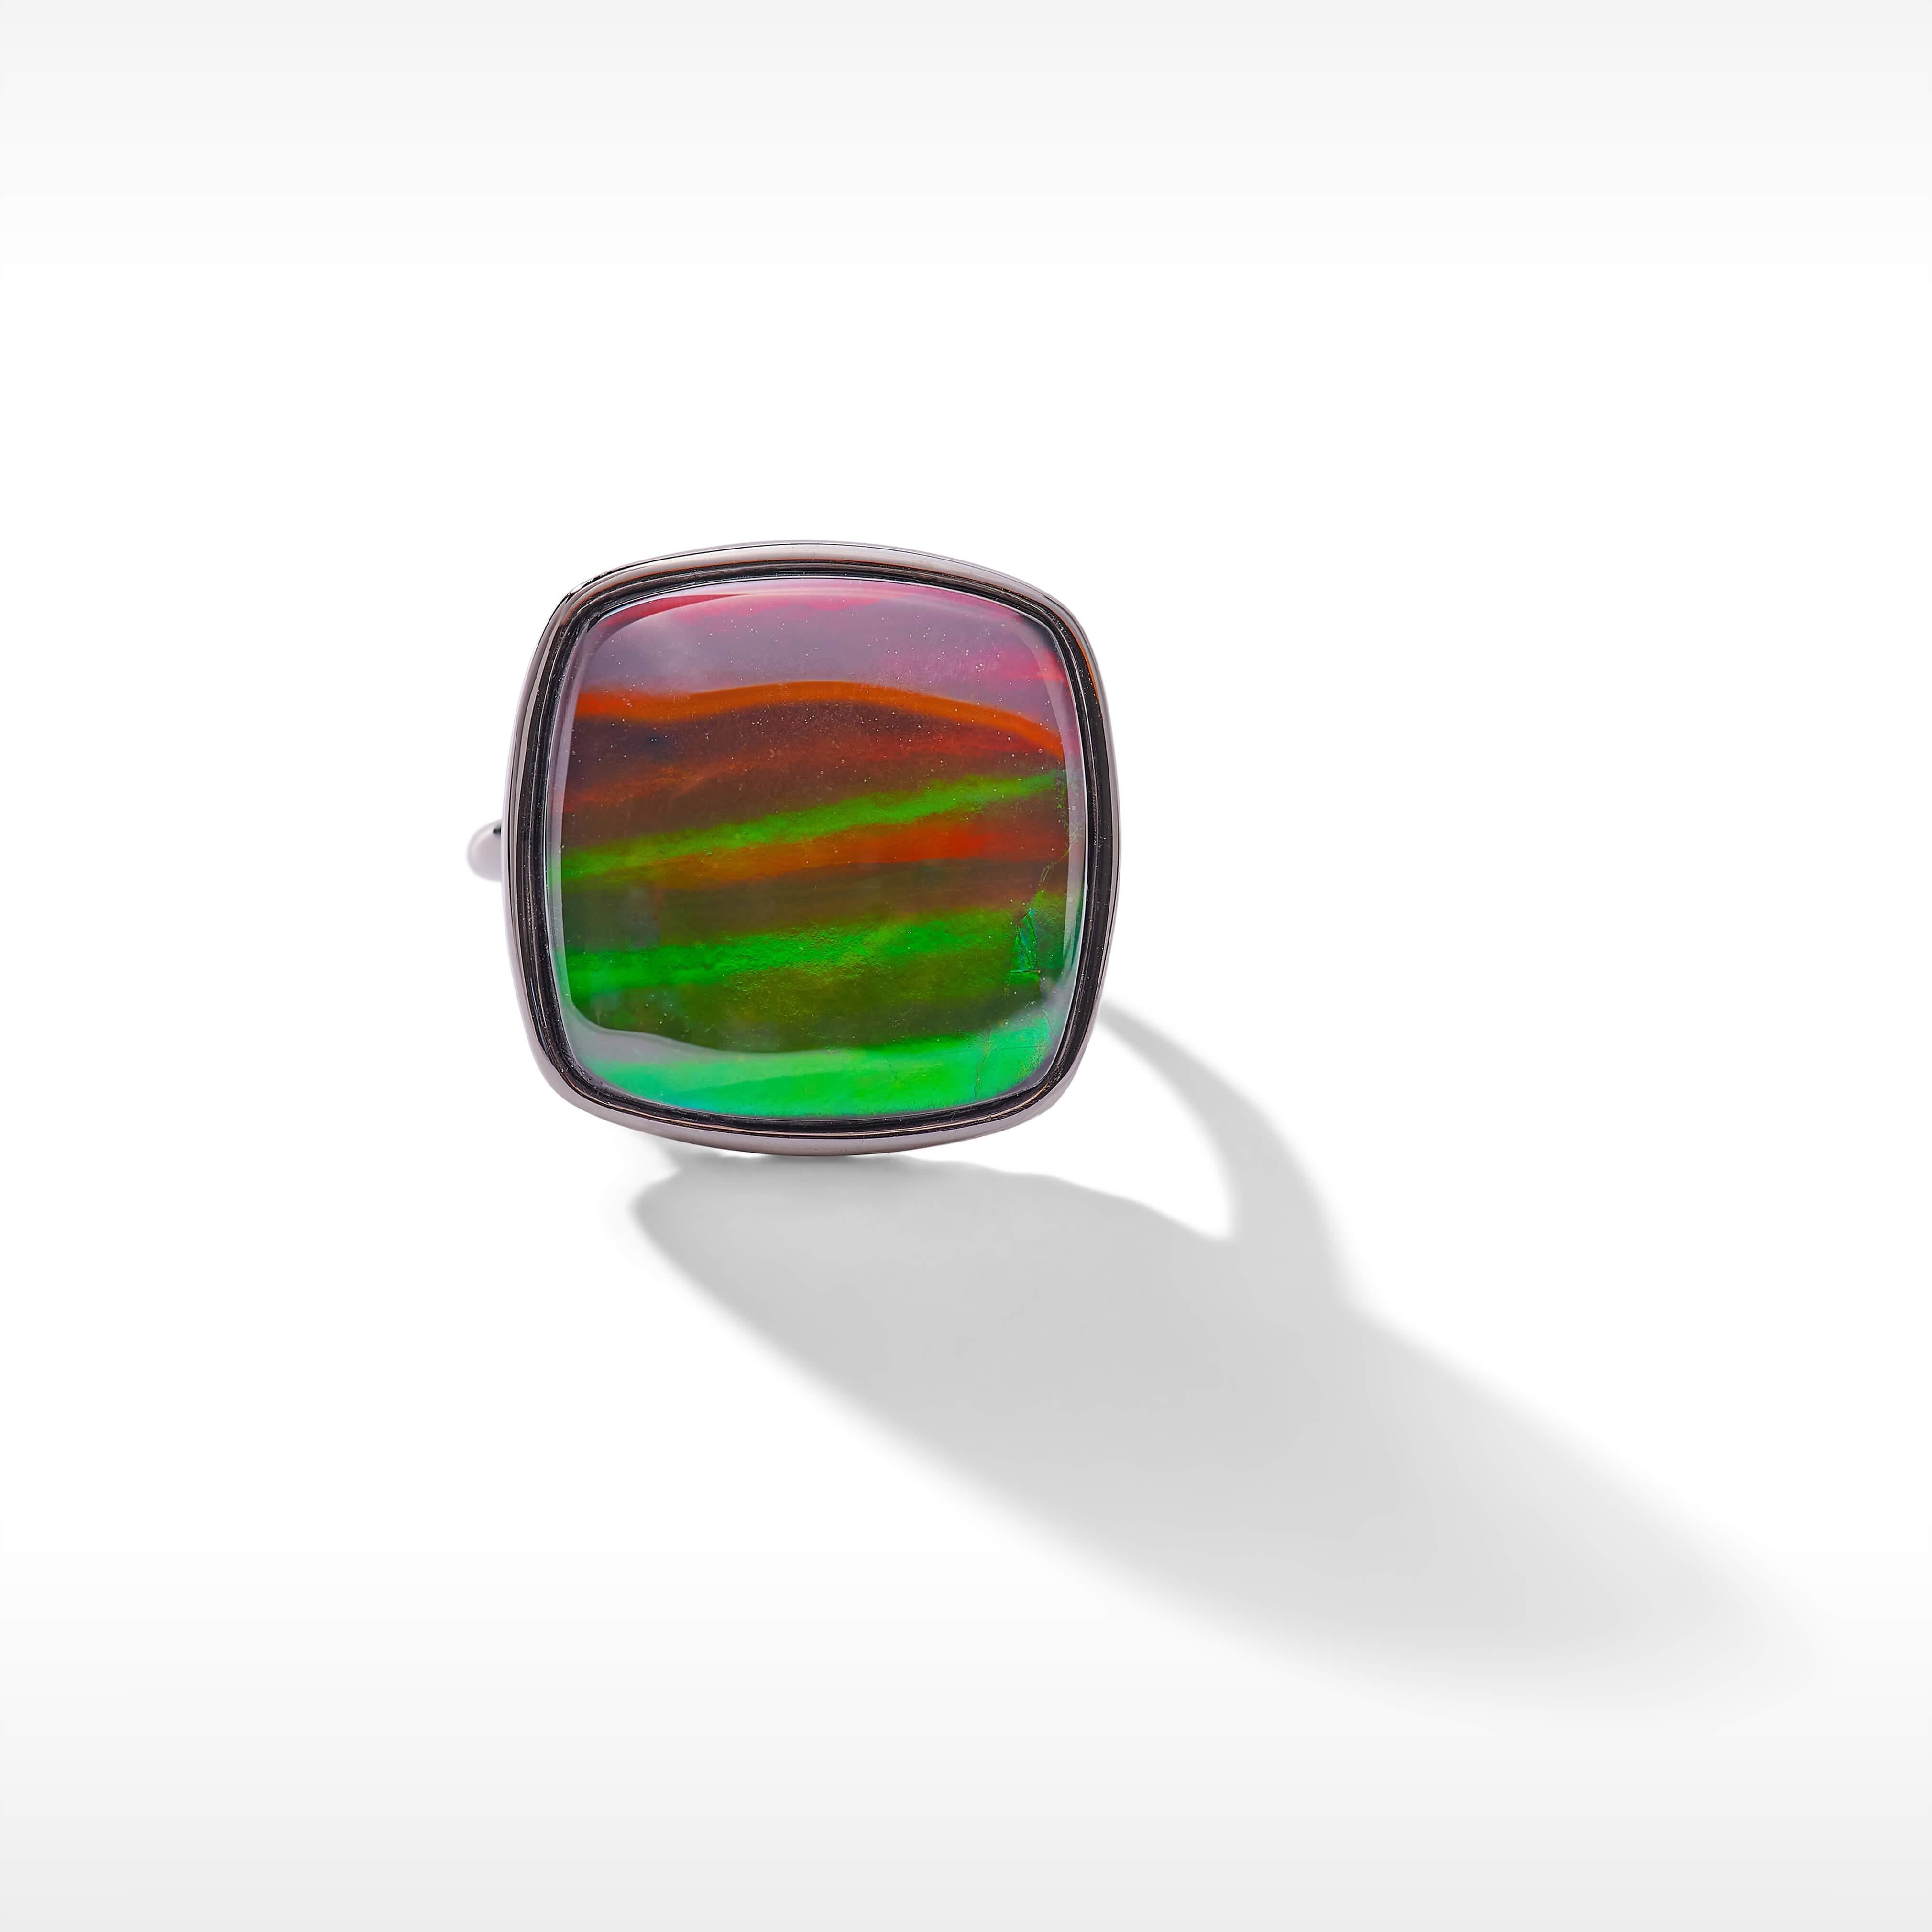 Product Details:

The Origins collection features bold ammolite showpieces highlighting organic textures inspired by our ammonite roots.

A grade Ammolite
18mm cushion Ammolite ring
925 Sterling Silver
Ring dimension: 20.16mm x 20.37mm.